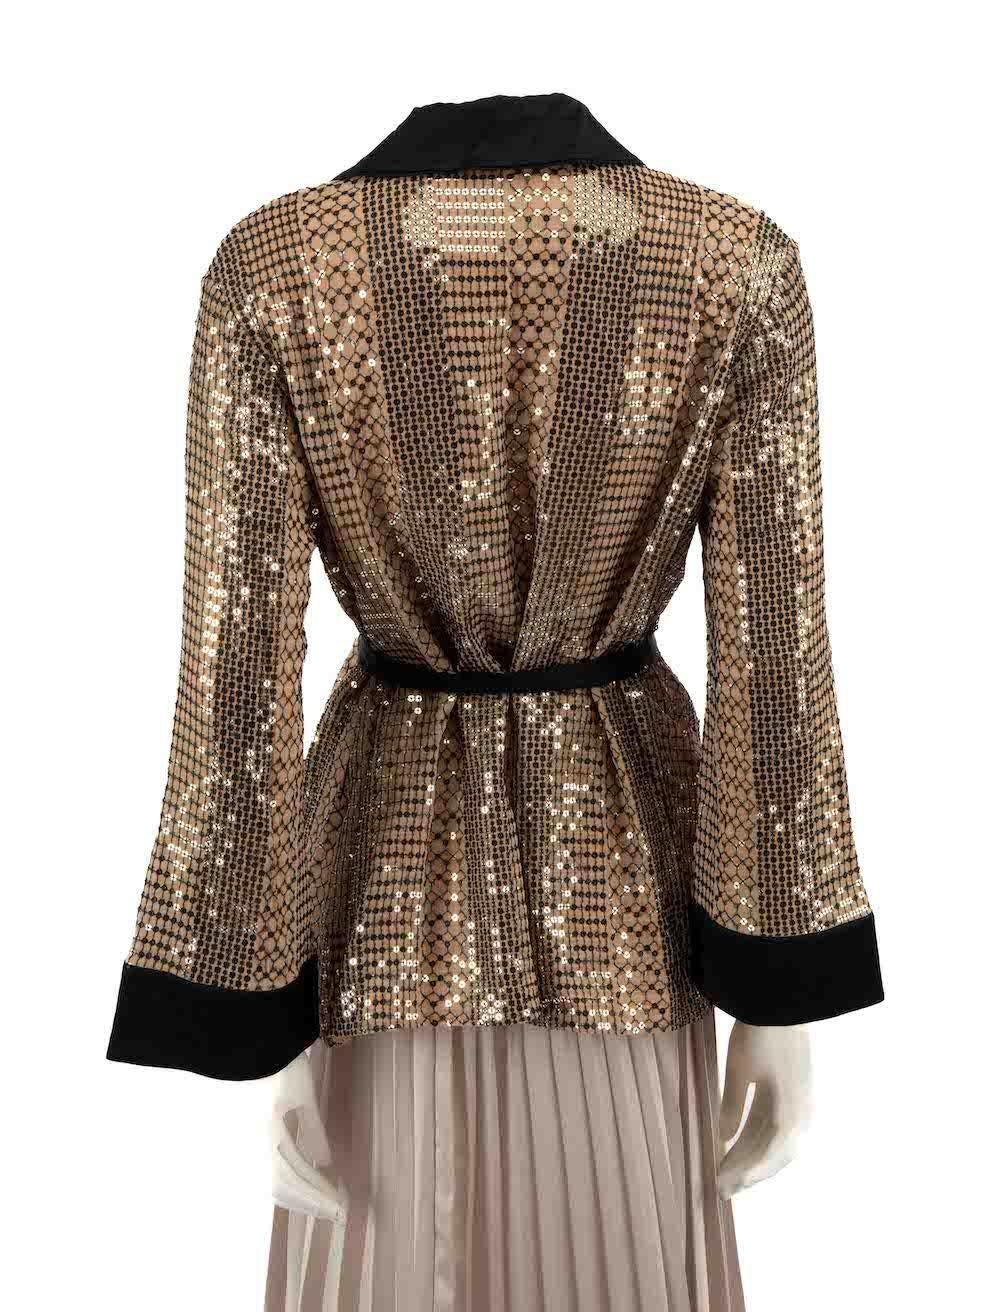 Women's Temperley London Brown Sequin Embellished Shirt Size L For Sale